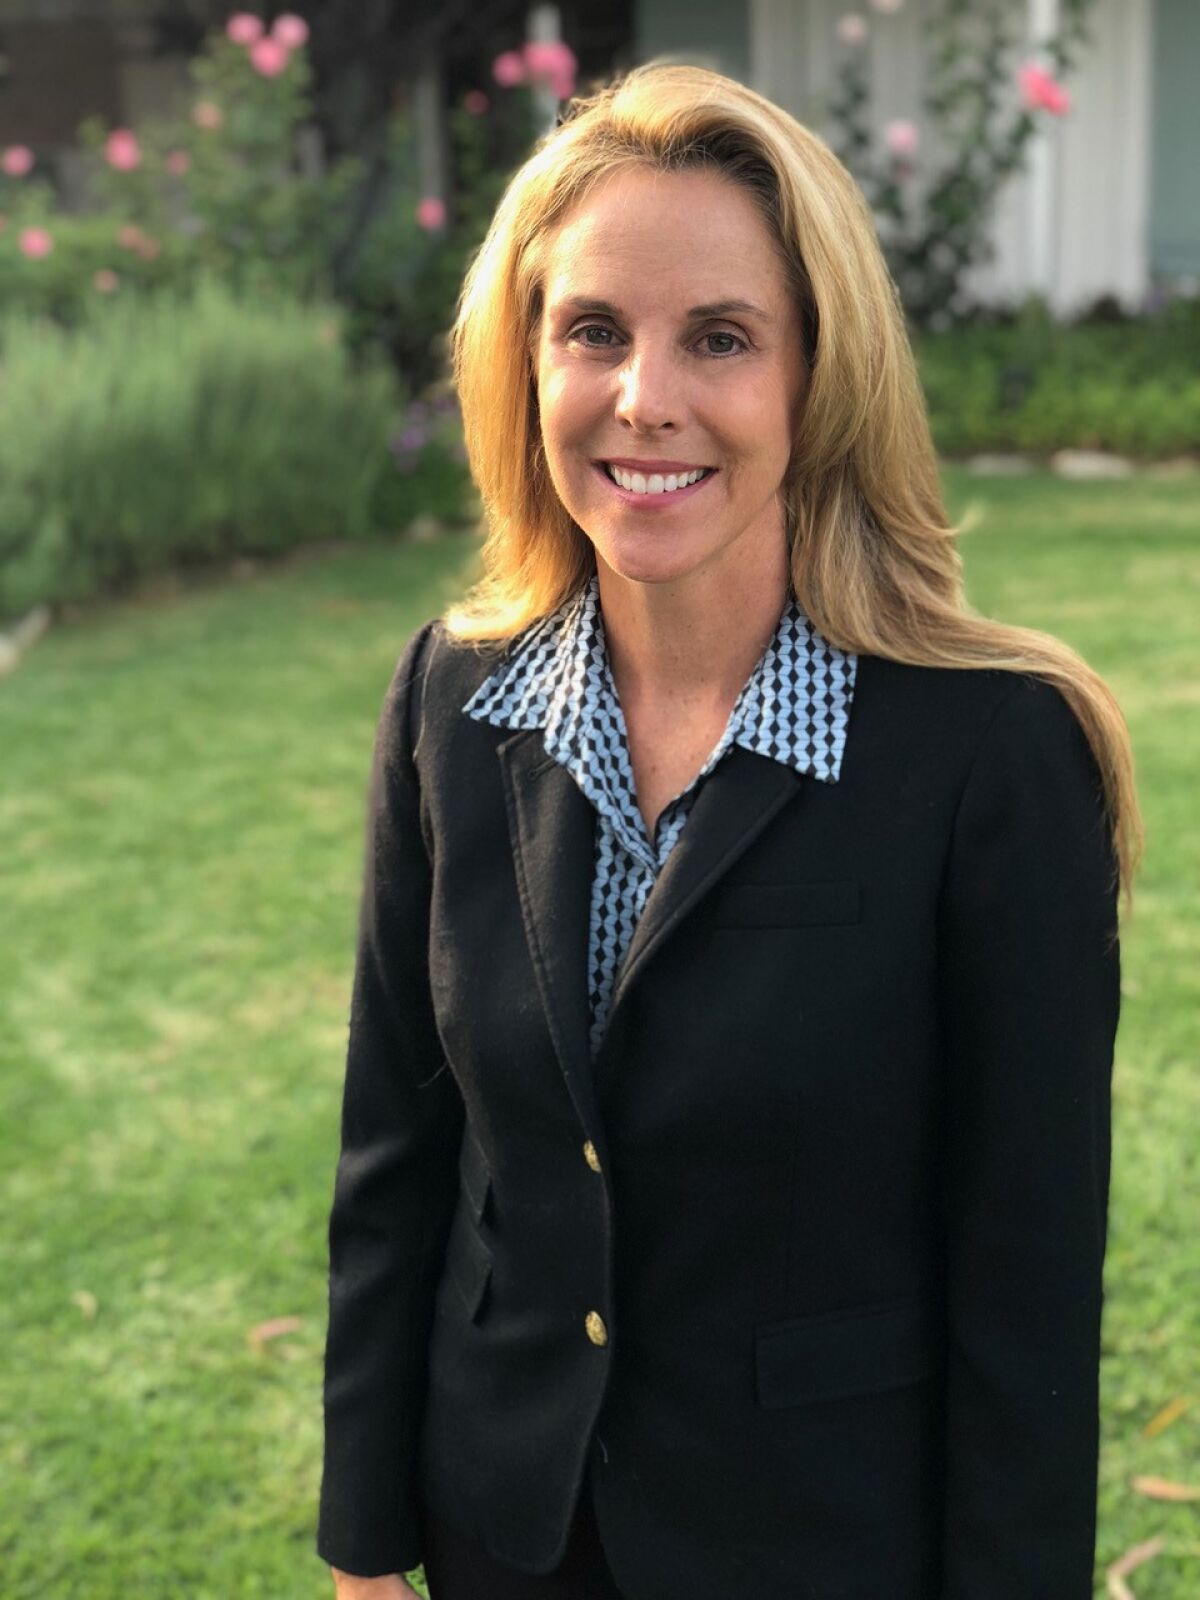 Melisse Mossy will be leaving the SDUHSD board by the end of the school year.